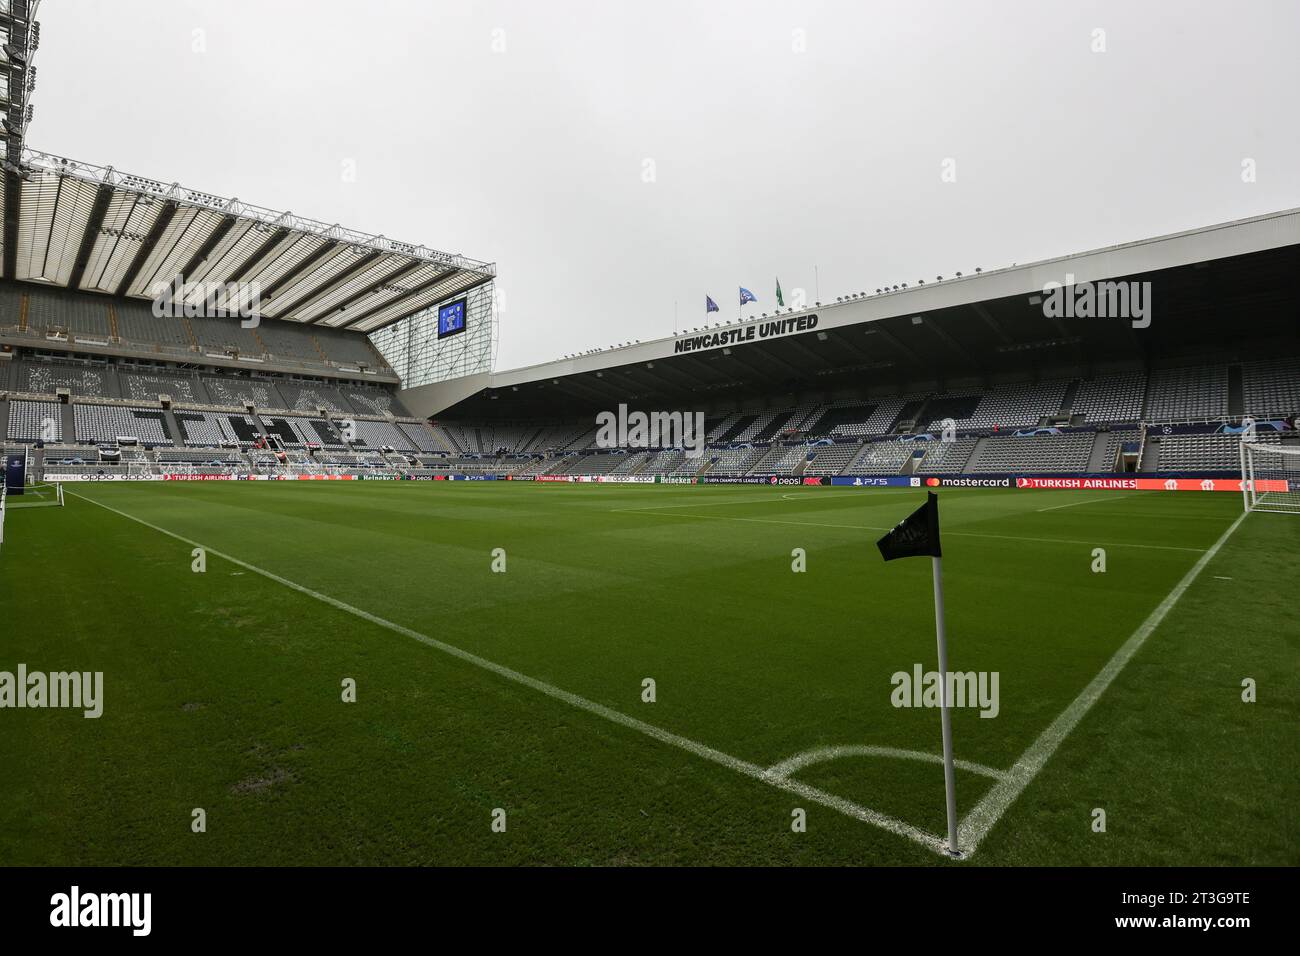 Newcastle, UK. 25th Oct, 2023. A general view of St. James's Park during the UEFA Champions League match Newcastle United vs Borussia Dortmund at St. James's Park, Newcastle, United Kingdom, 25th October 2023 (Photo by Mark Cosgrove/News Images) Credit: News Images LTD/Alamy Live News Stock Photo